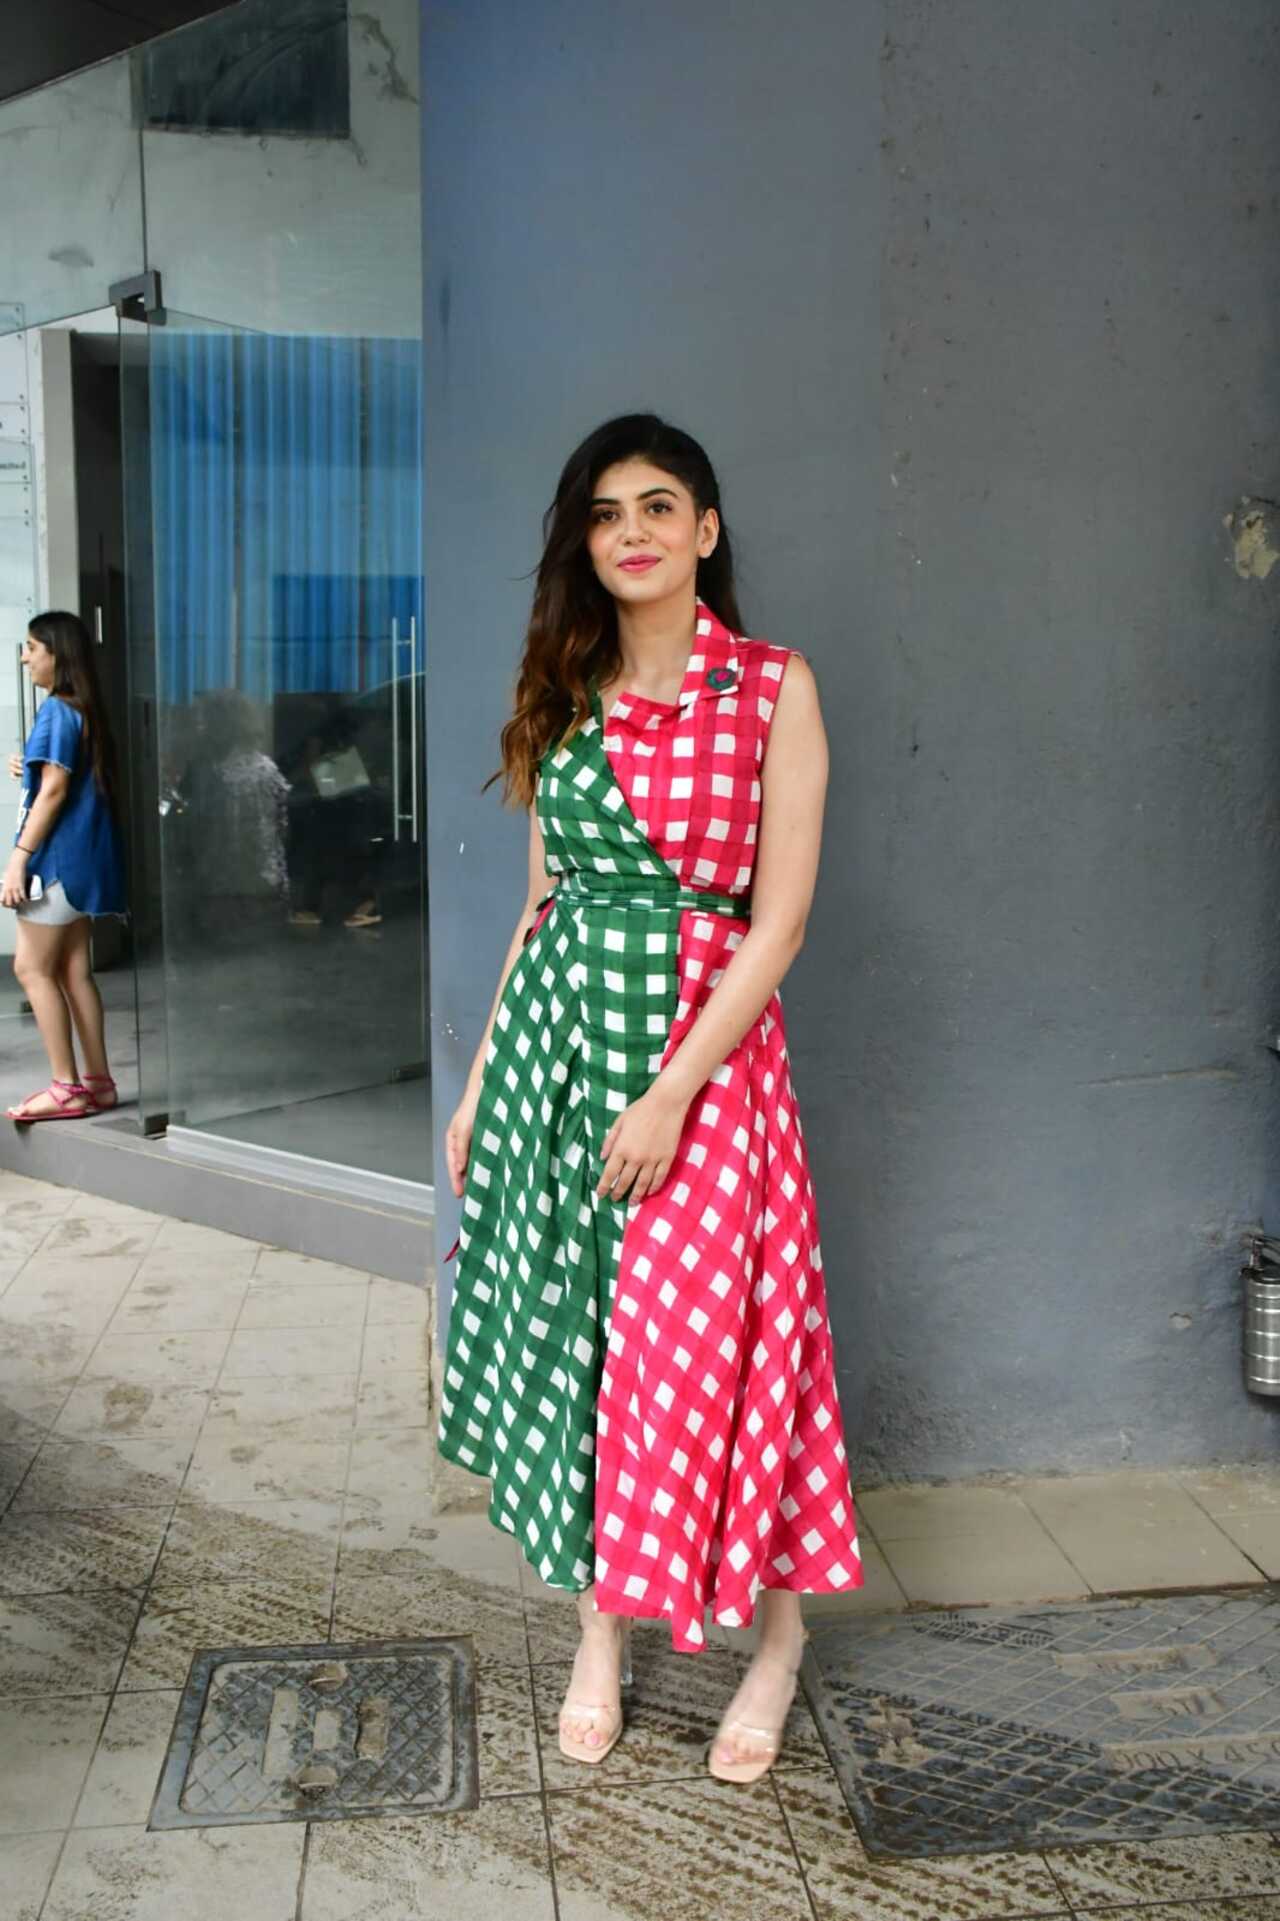 Sanjana Sanghi looked pretty in a green and pink dress